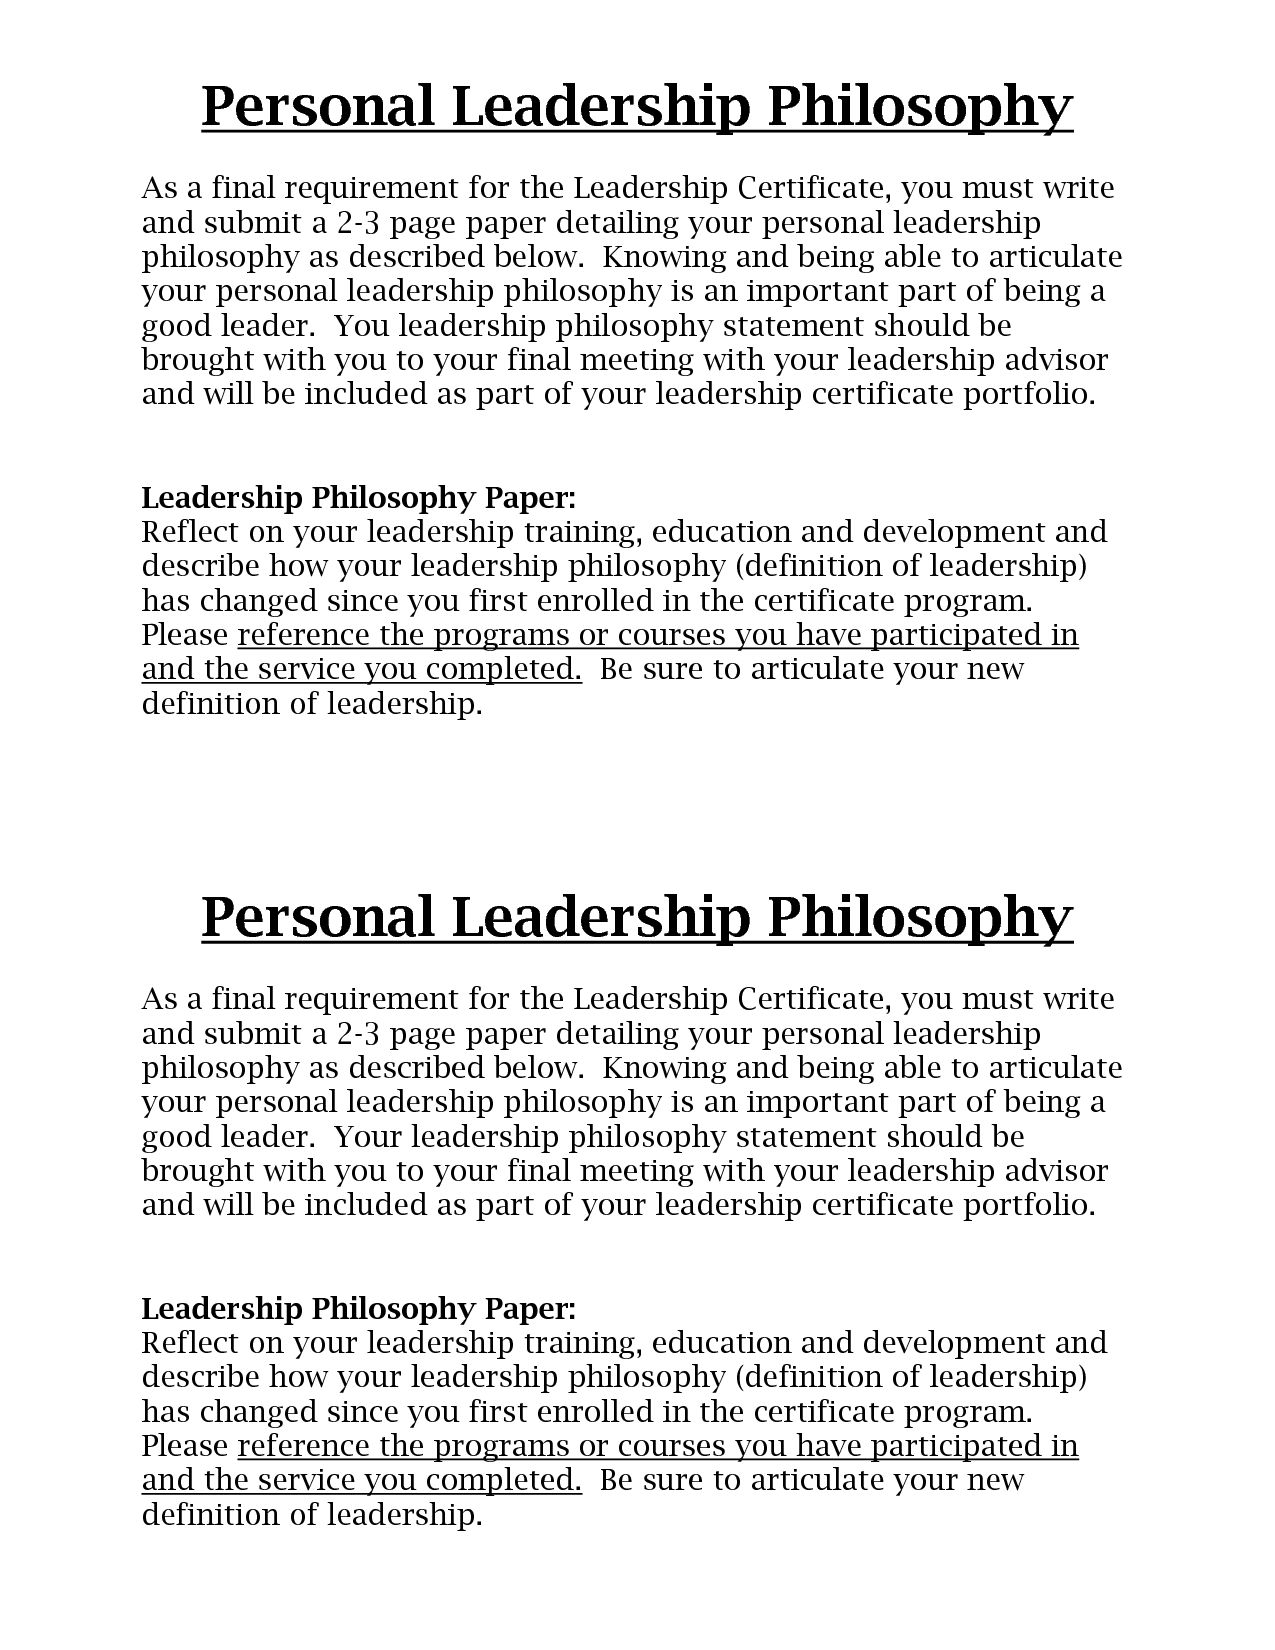 Personal philosophy of education essays